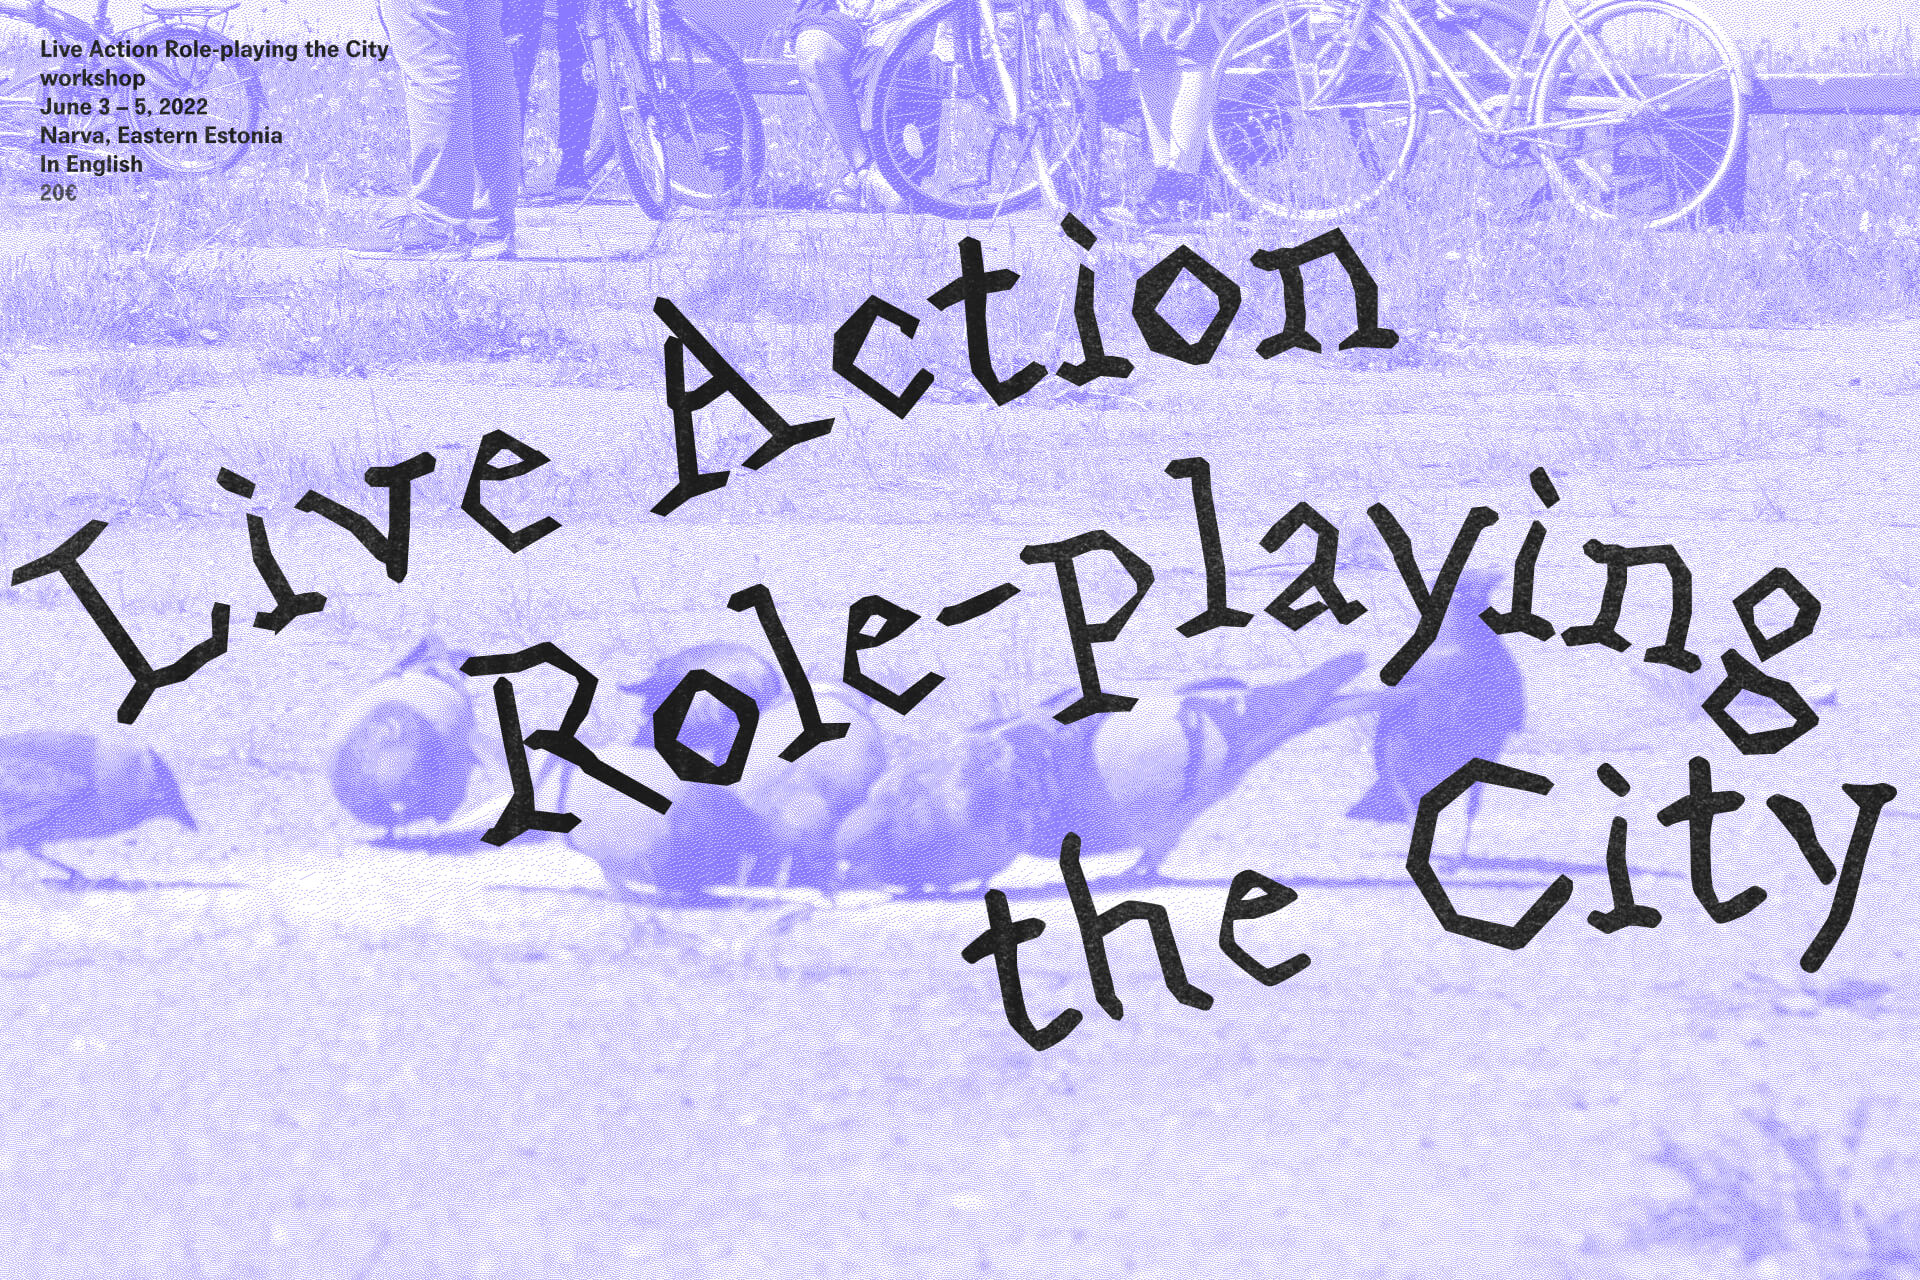 Live-Action Role-playing the City – Workshop Open Call